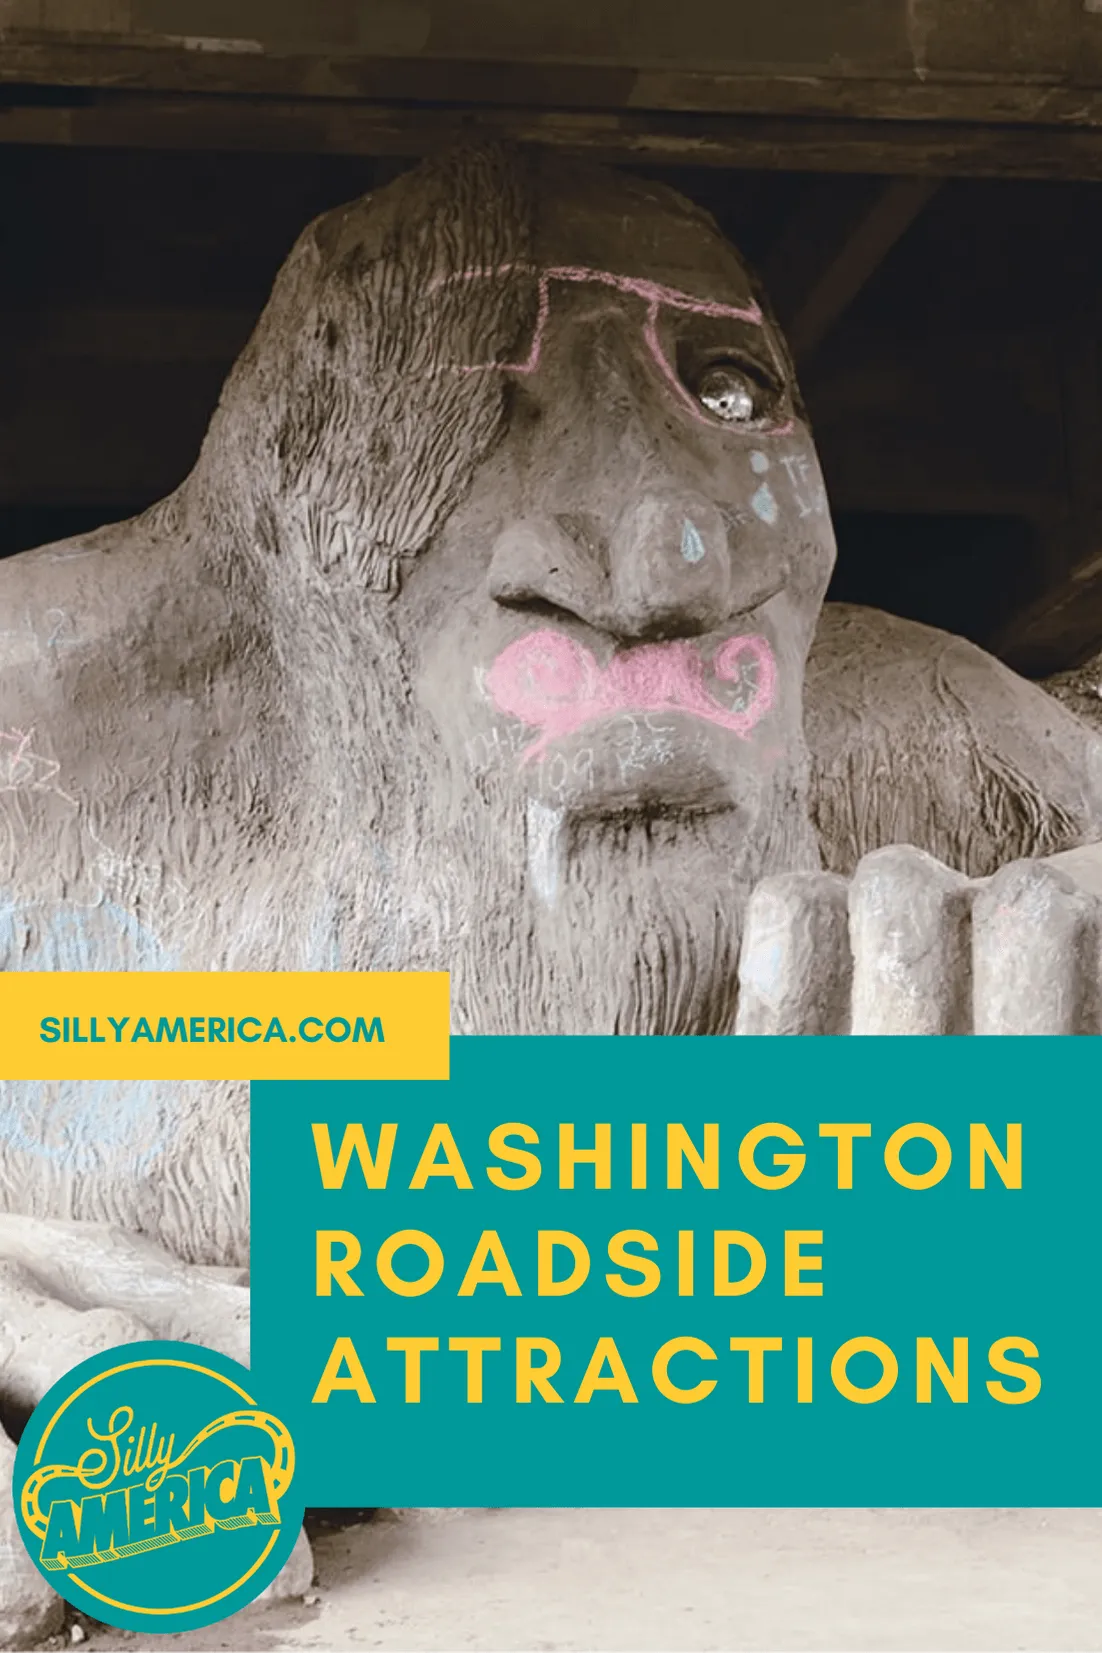 The best Washington roadside attractions to visit on a Washington road trip. Add these roadside oddities to your travel bucket list, itinerary, or driving route map! Fun road trip stops for kids or adults! #WashingtonRoadsideAttractions #WashingtonRoadsideAttraction #RoadsideAttractions #RoadsideAttraction #RoadTrip #WashingtonRoadTrip #WashingtonRoadTripMap #WashingtonRoadTripBucketLists #WashingtonBucketList  #SeattleRoadTrip